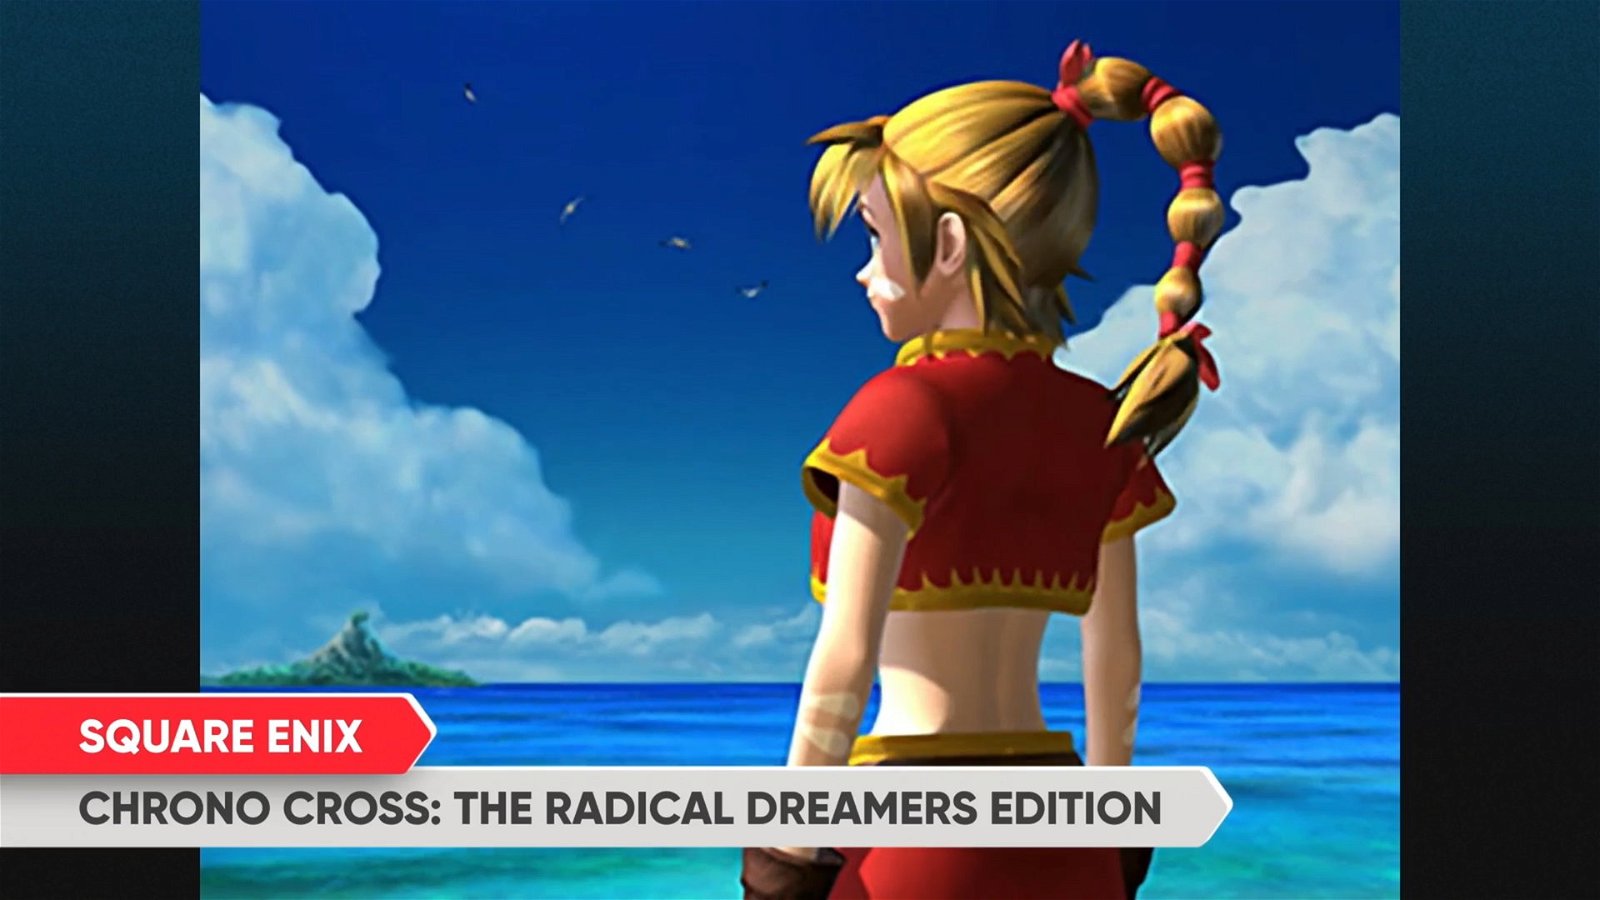 CHRONO CROSS: THE RADICAL DREAMERS EDITION for Nintendo Switch